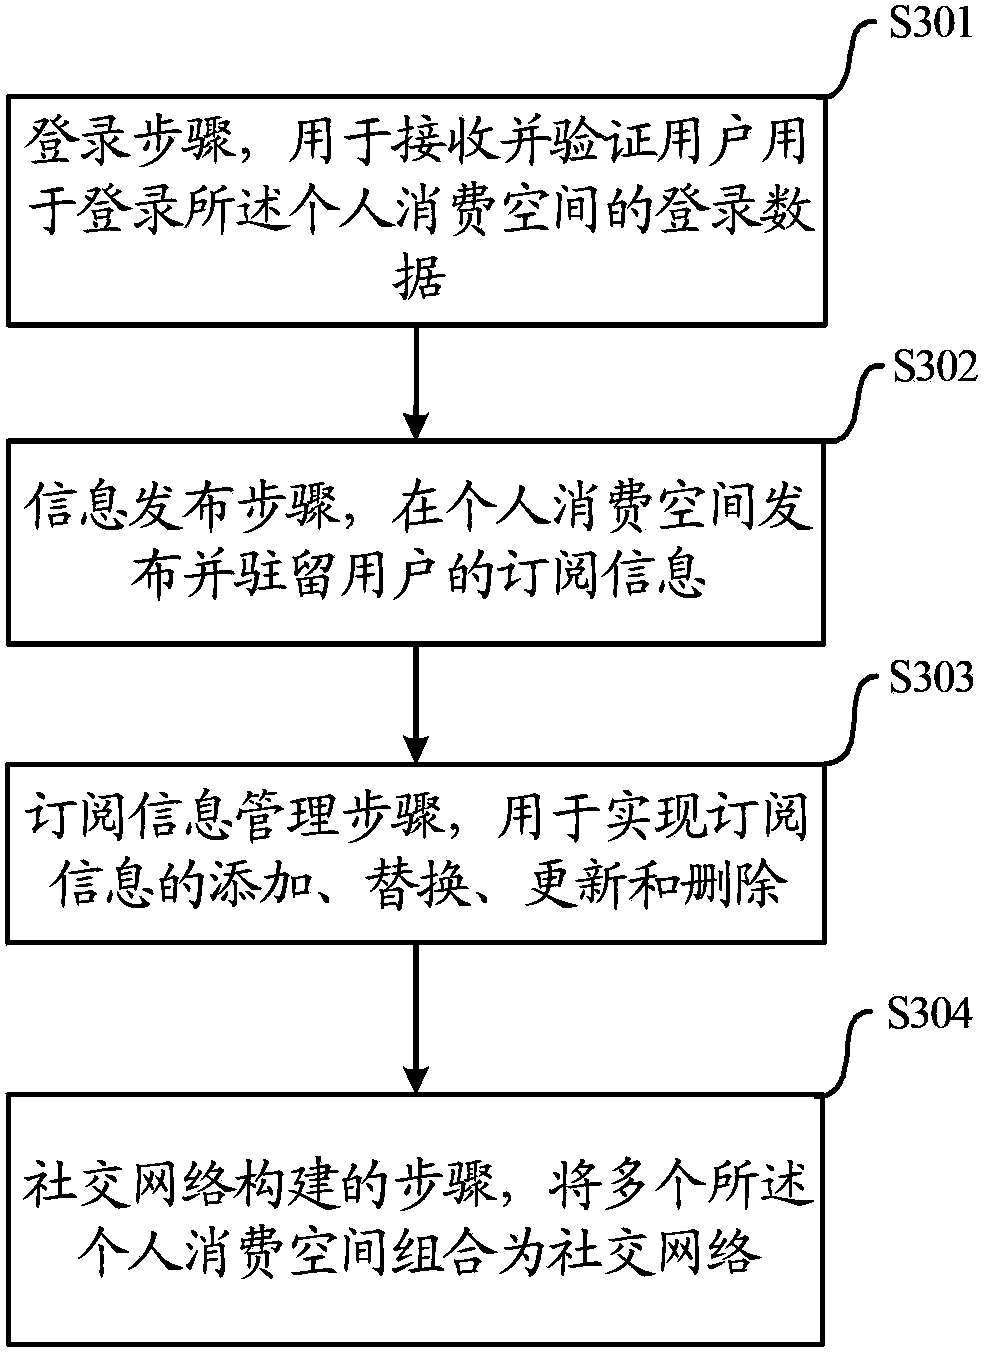 Information processing system and information processing method for implementing network transaction by aid of social network